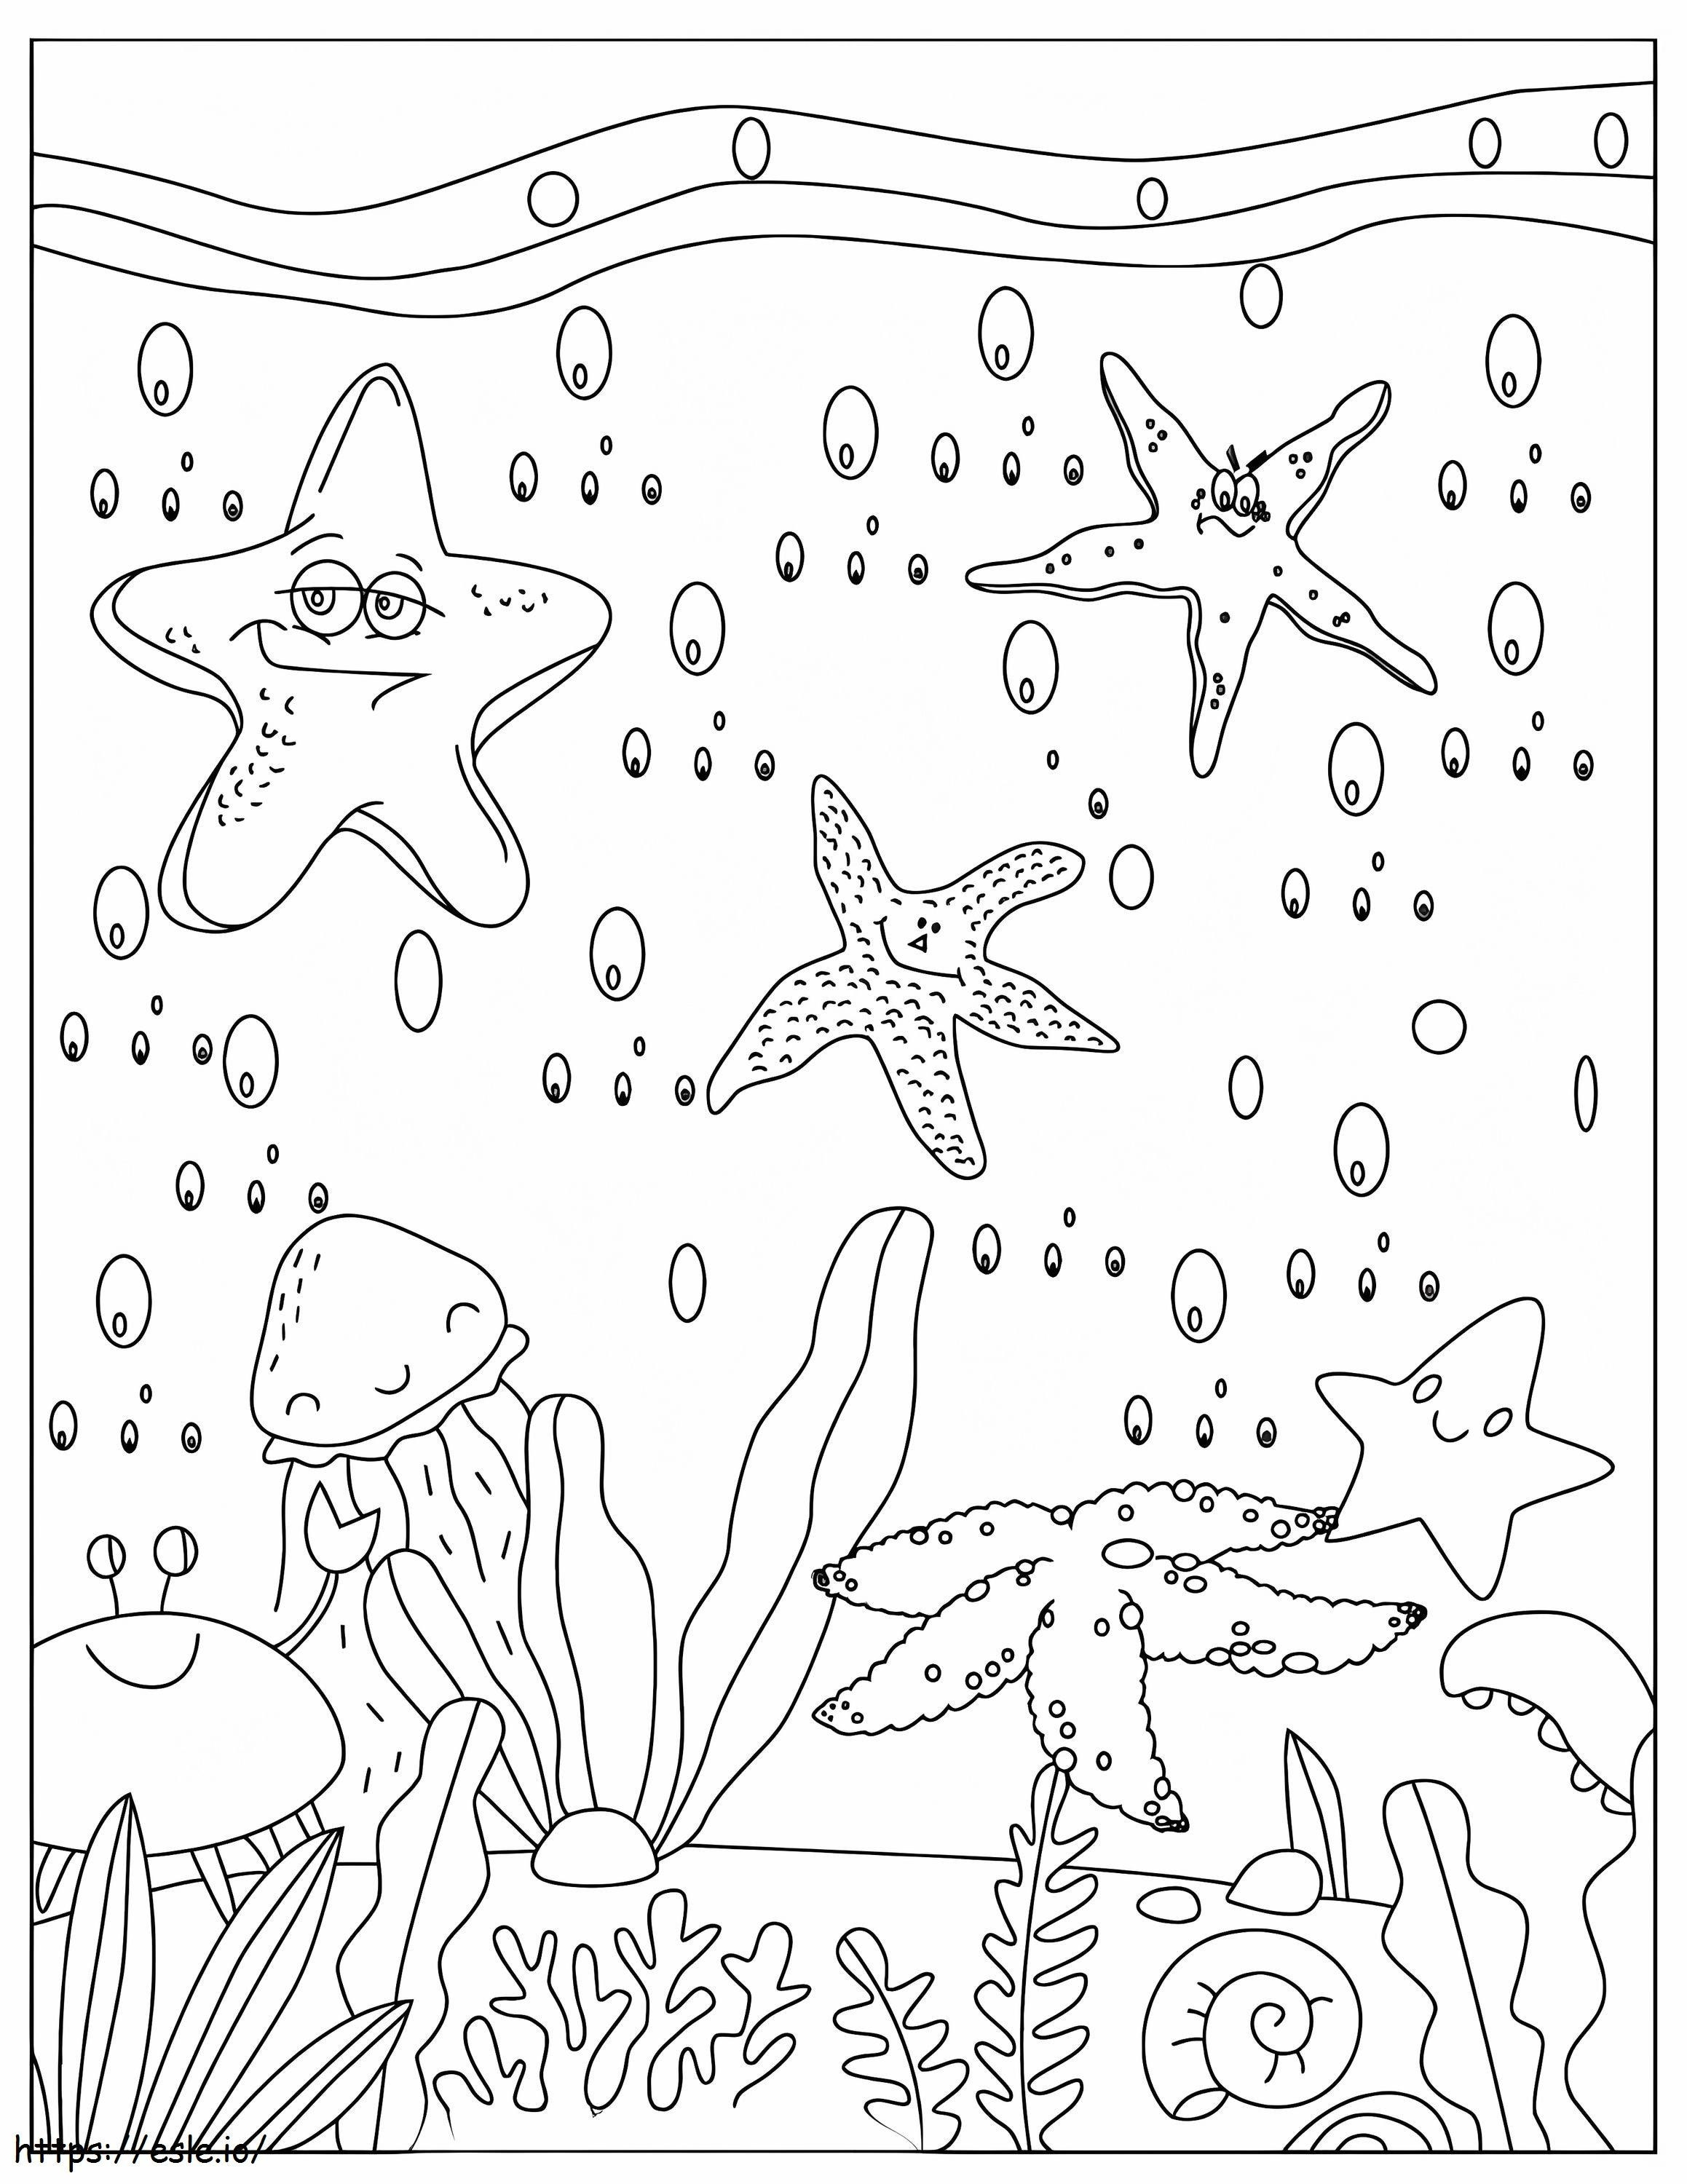 Seal Animal coloring page